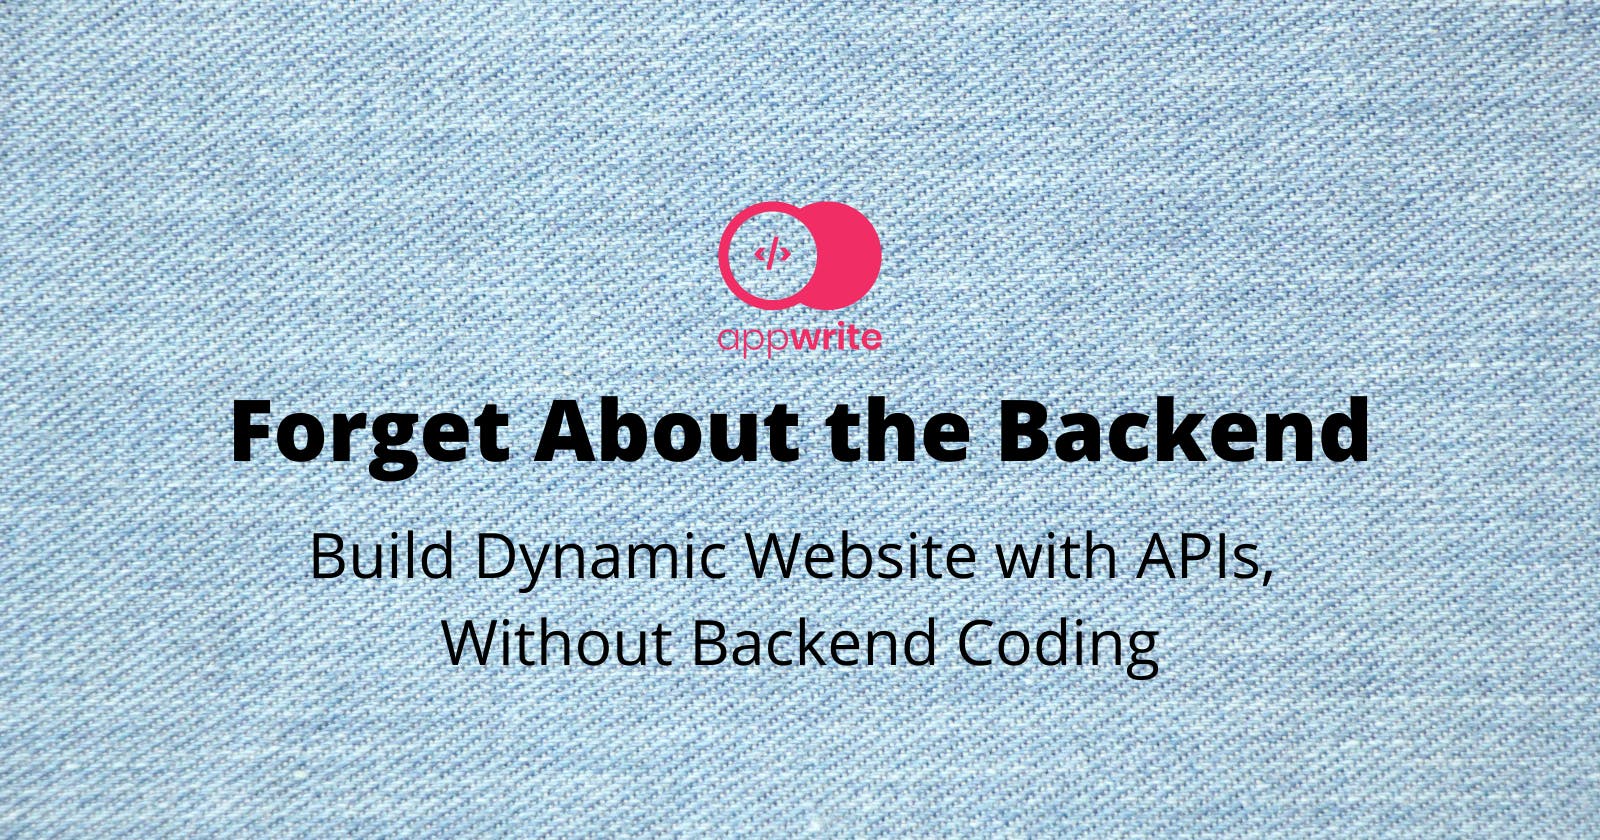 How to Build Dynamic Website with APIs, Without Backend Coding!